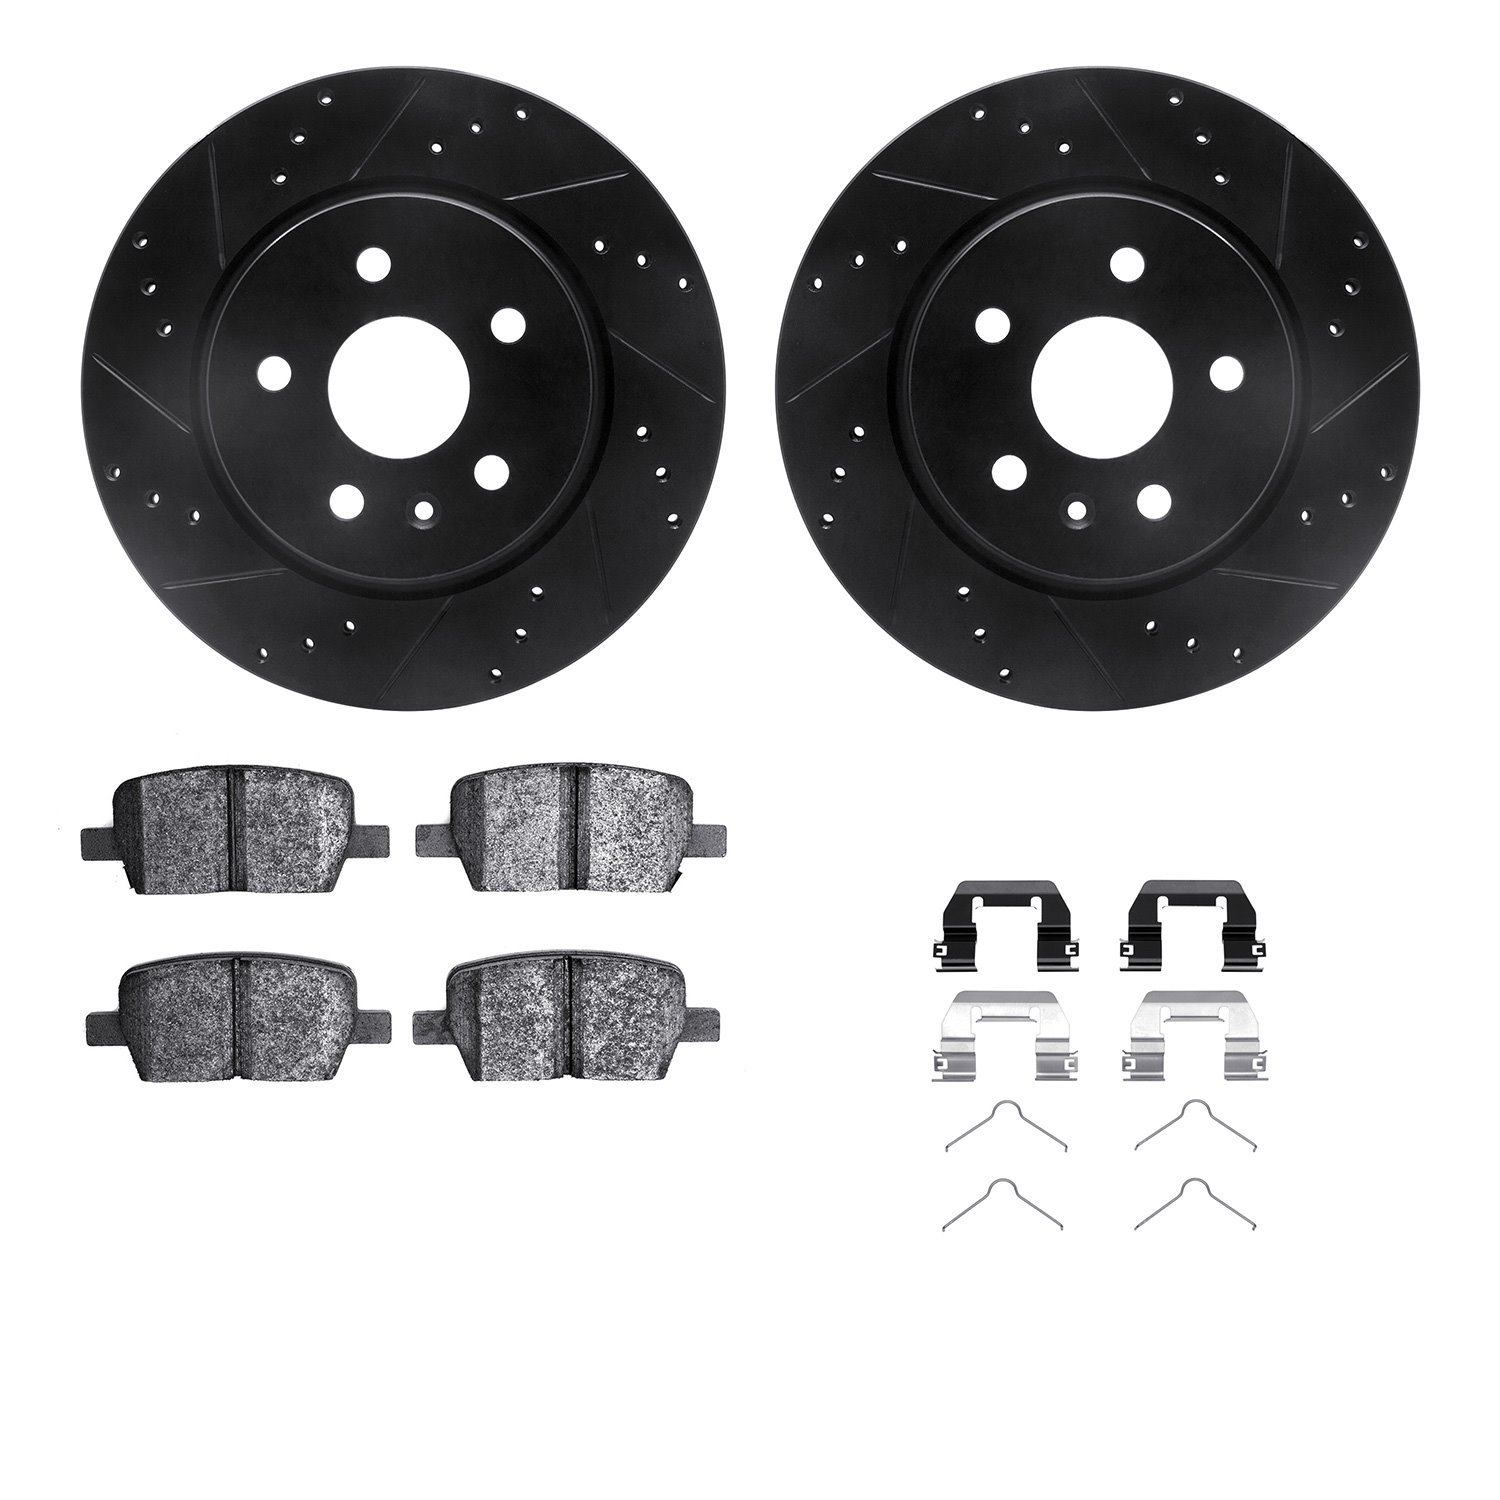 8312-65026 Drilled/Slotted Brake Rotors with 3000-Series Ceramic Brake Pads Kit & Hardware [Black], Fits Select GM, Position: Re